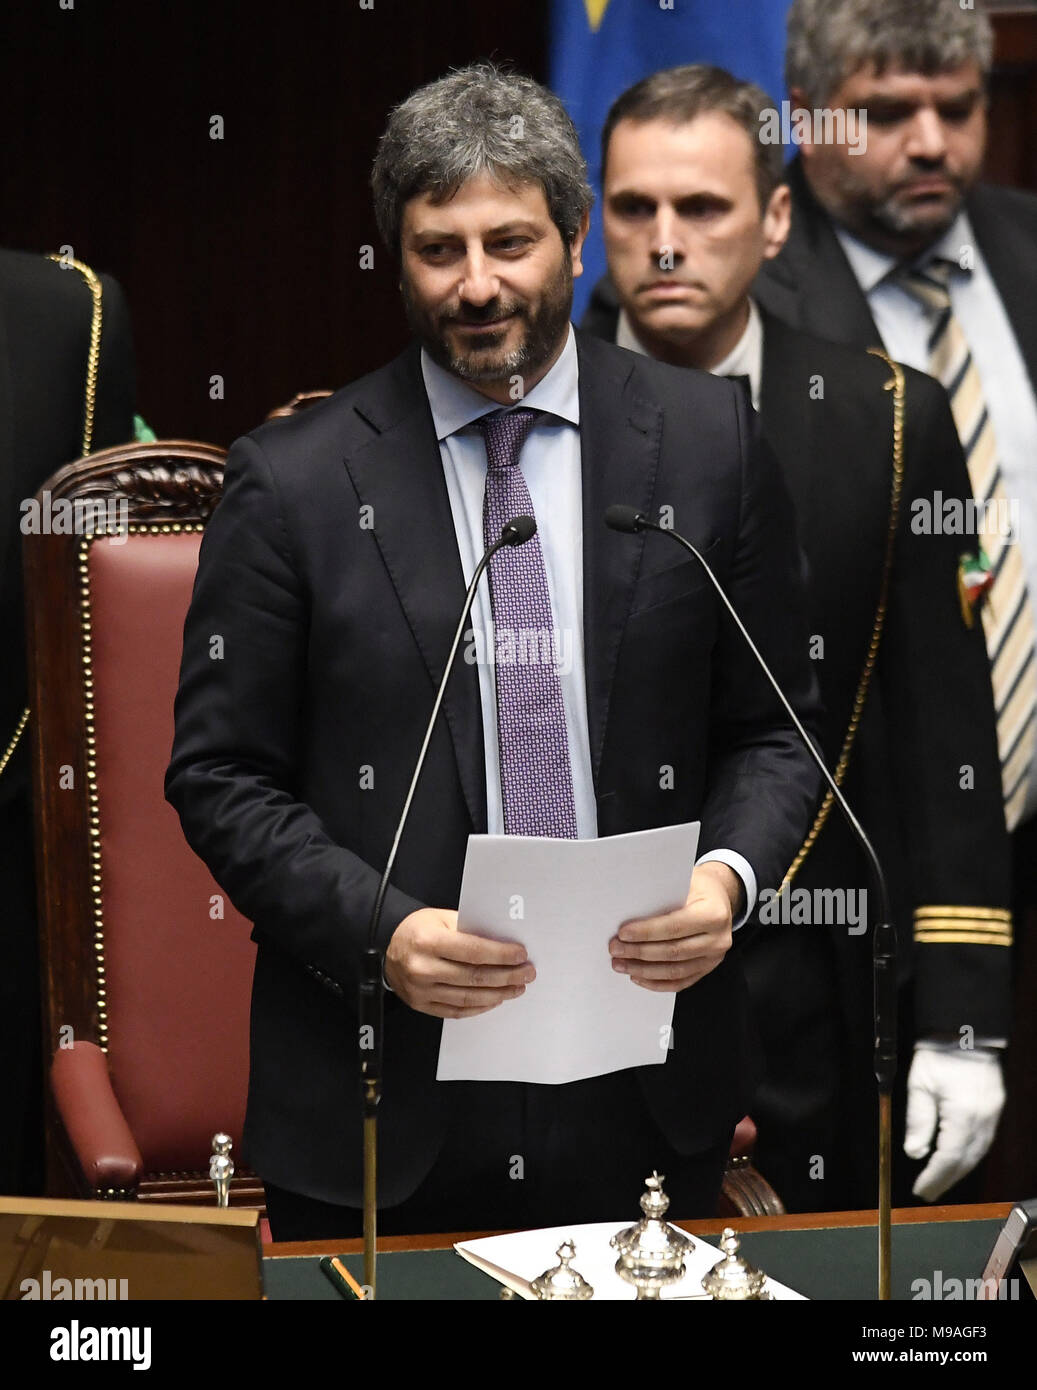 Rome. 24th Mar, 2018. Newly elected lower house speaker Roberto Fico speaks at the lower house of parliament in Rome, Italy, on March 24, 2018. Italy's center-right bloc and the anti-establishment Five Star Movement joined forces Saturday to elect a speaker for each chamber of parliament, in what could be a test run for a possible government alliance in the wake of an inconclusive March 4 general election. Credit: Xinhua/Alamy Live News Stock Photo